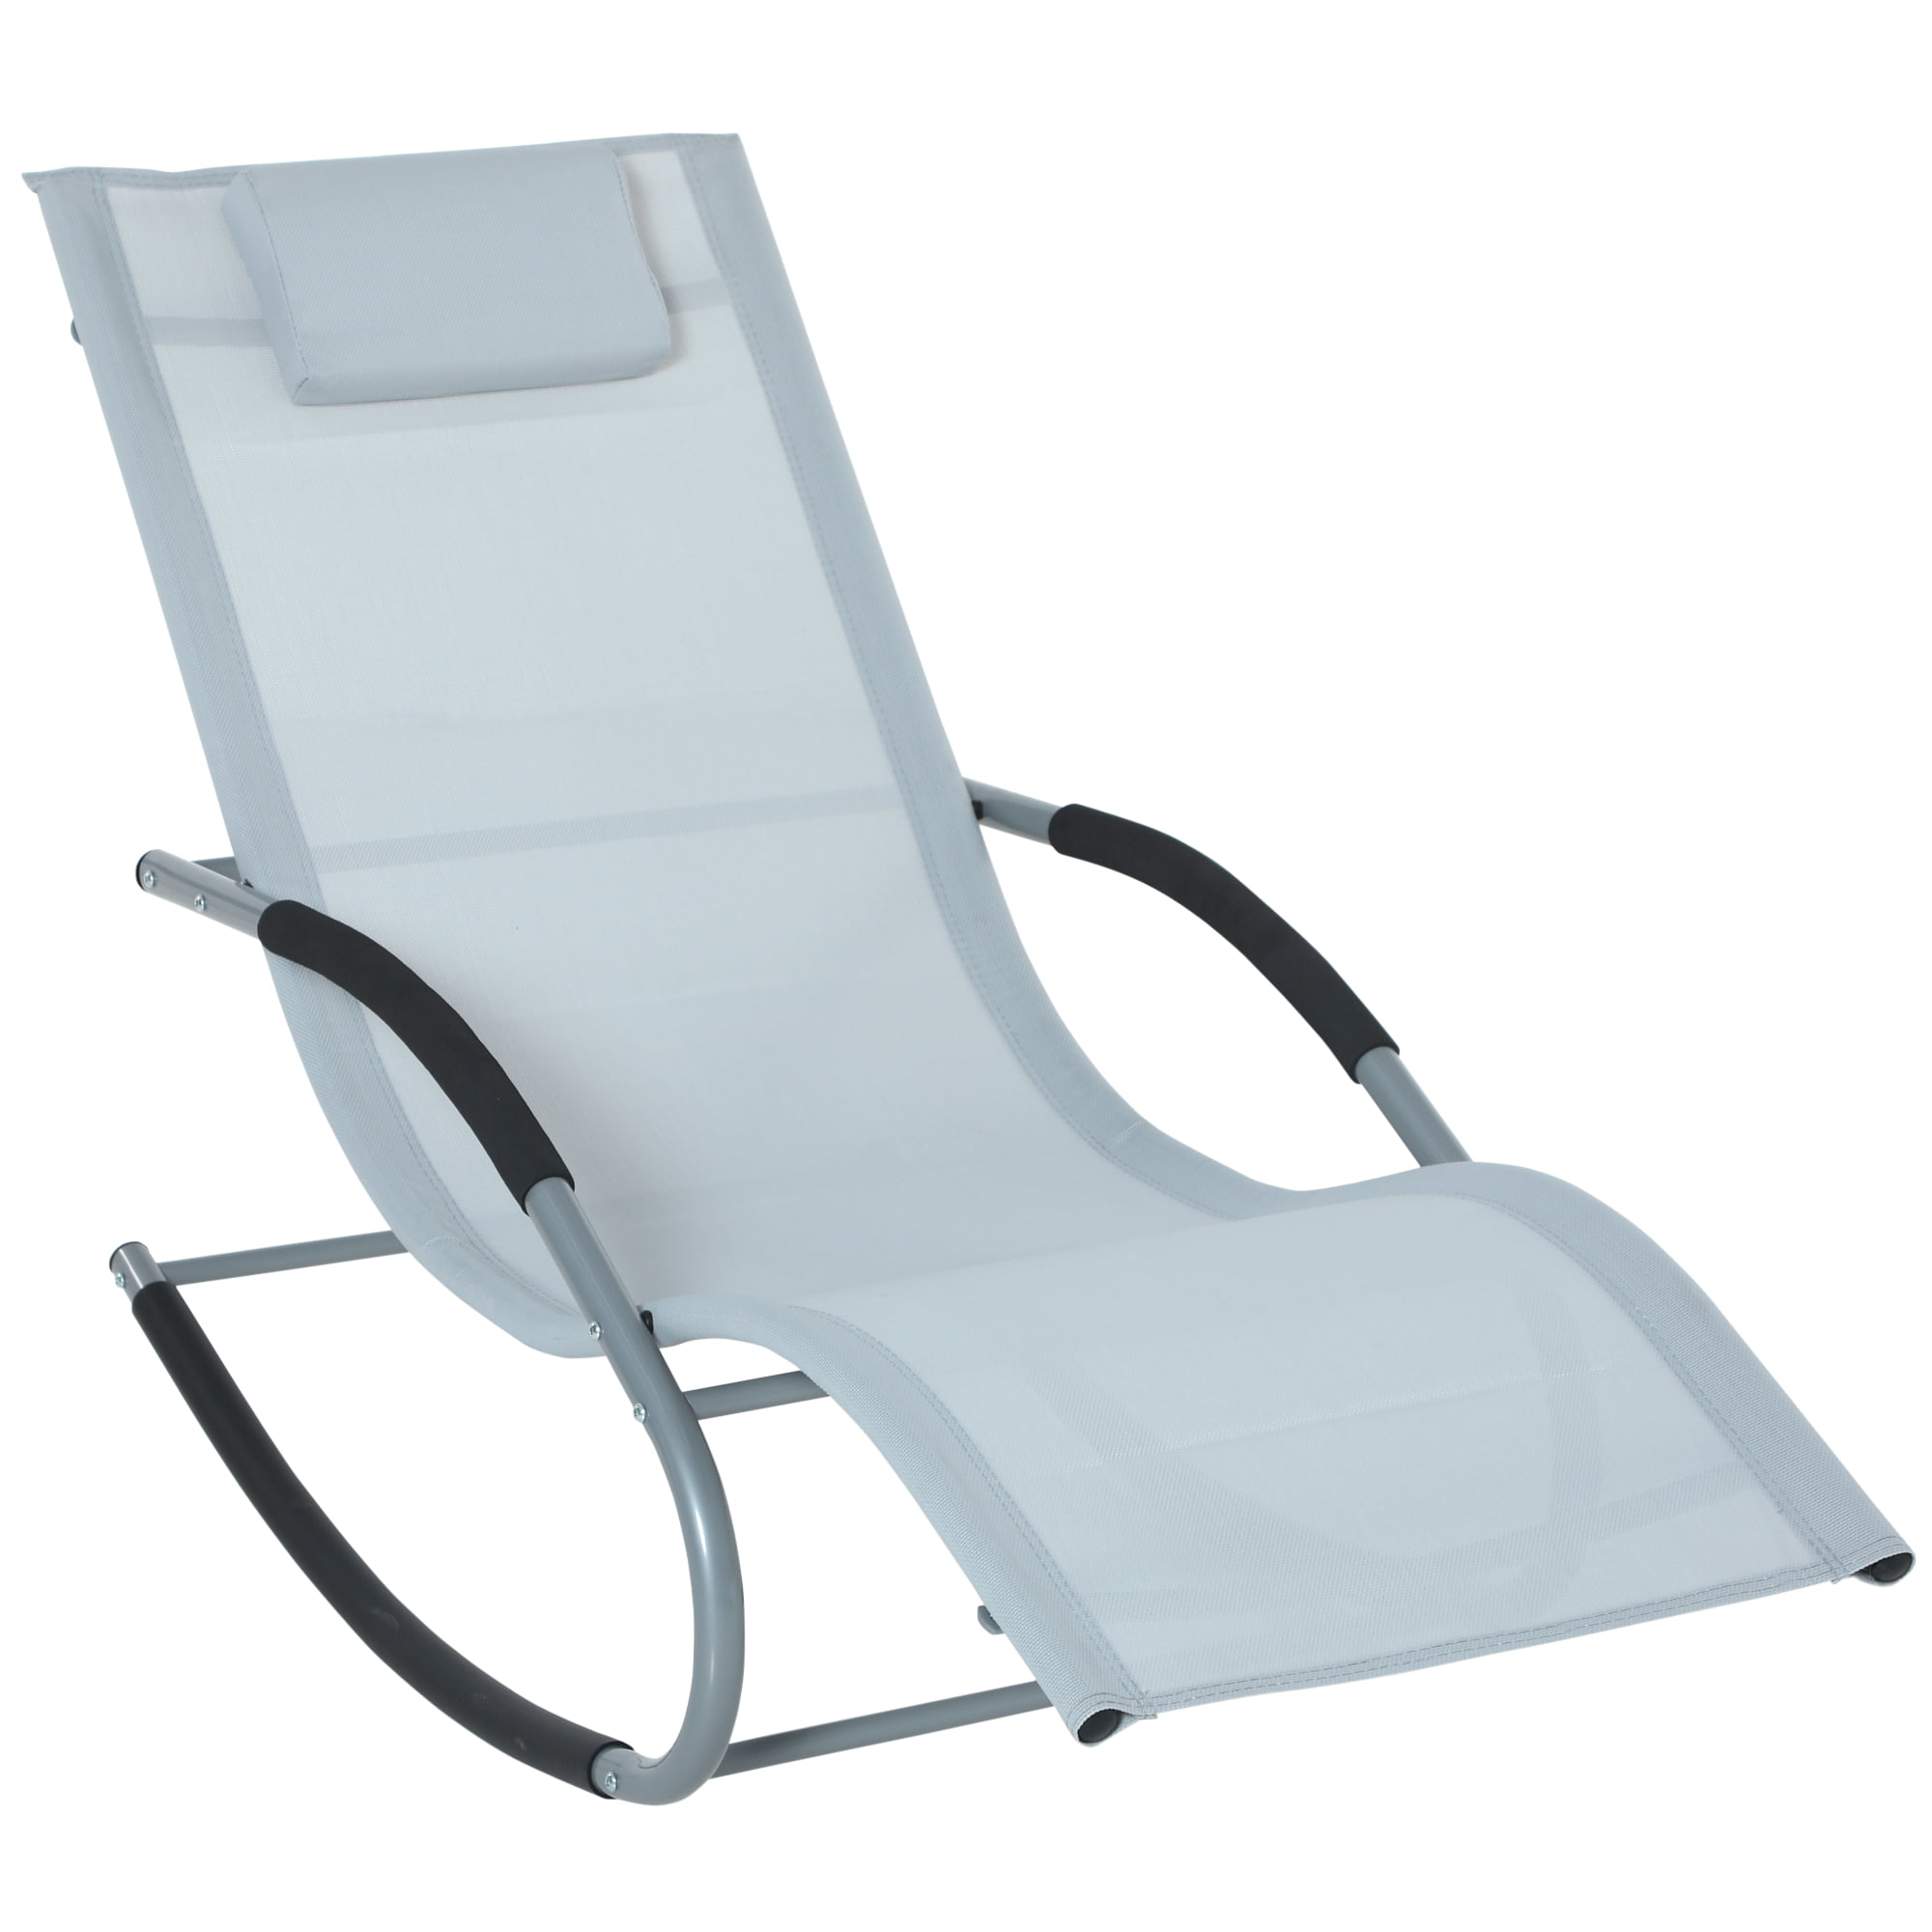 Outsunny Outdoor Wooden Adirondack Deck Lounge Chair with Ergonomic Design & a Built-In Cup Grey - Walmart.com